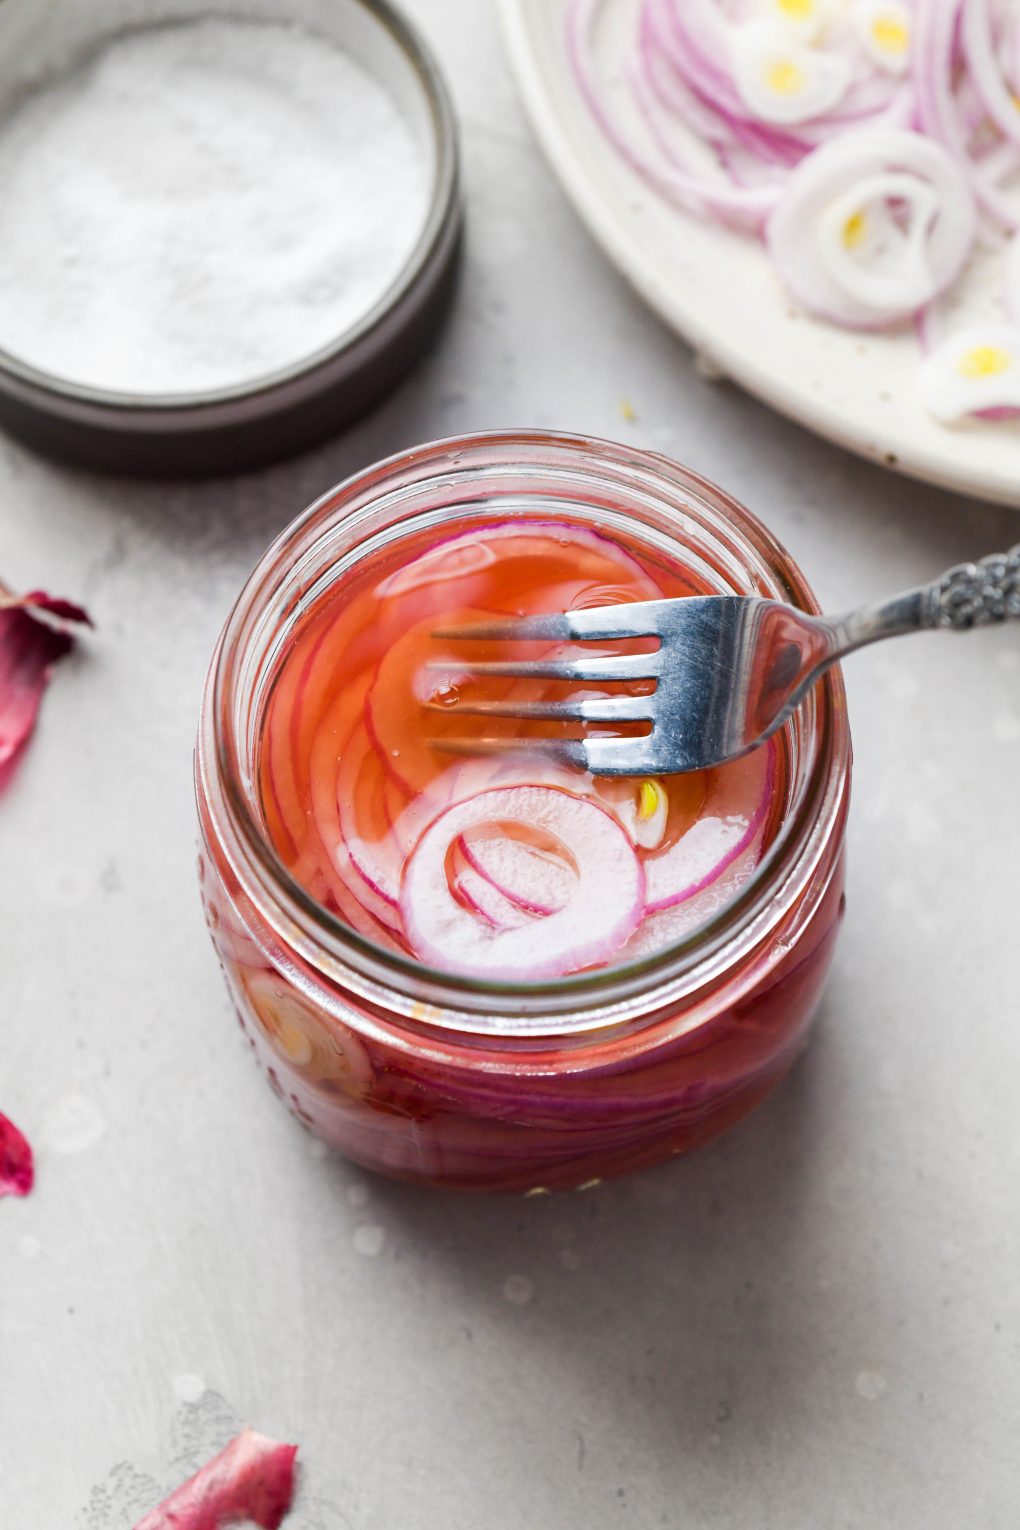 A 45 degree angle shot of a medium sized glass jar filled with bright pink thinly sliced red onion. On a light grey background with a fork pressing the red onion slices into the liquid and scattered red onion skins.